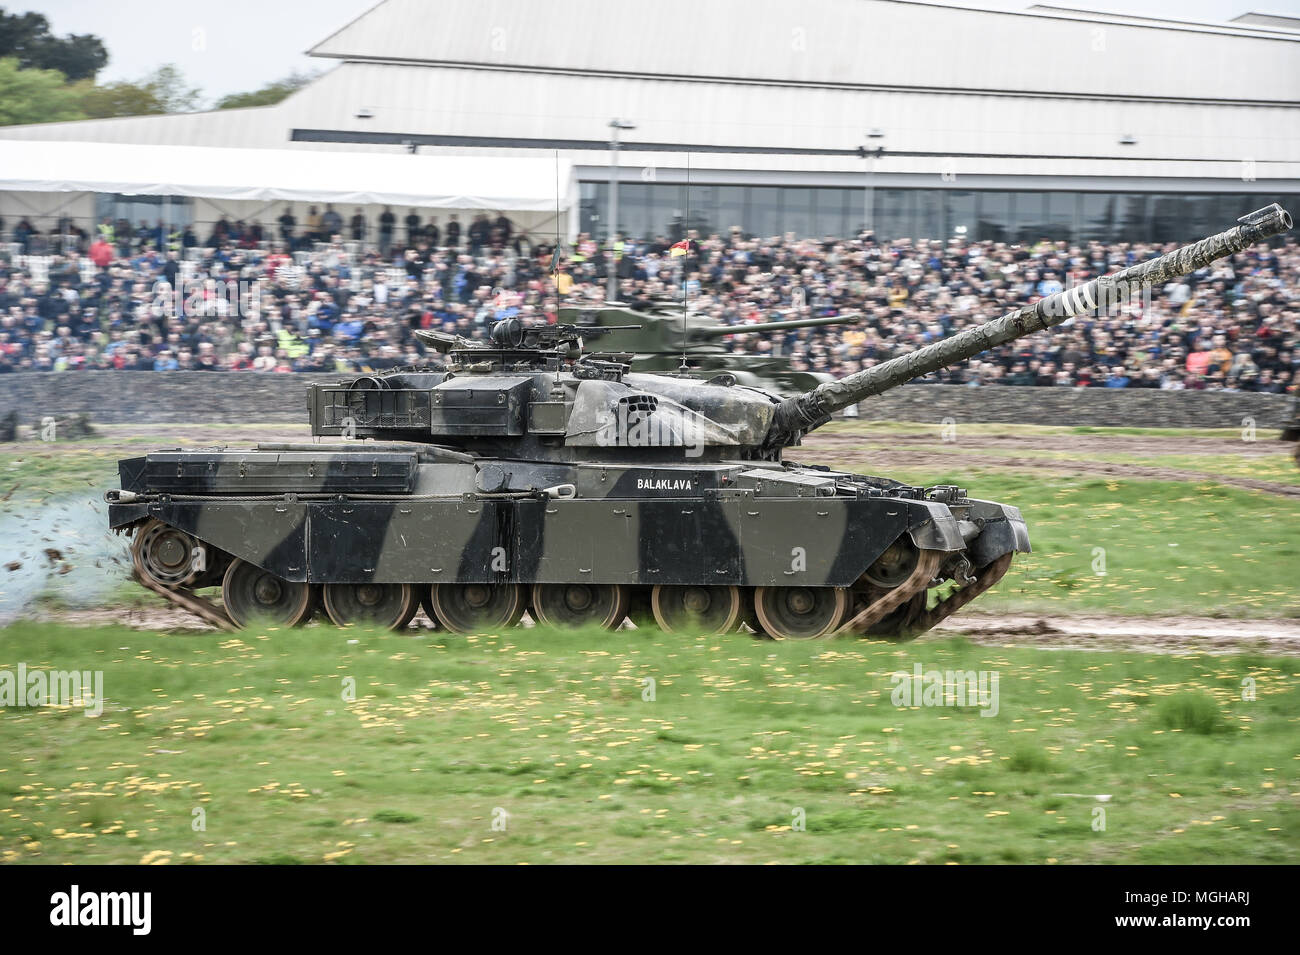 An FV4201 Chieftain main battle tank of the United Kingdom during the 1960s, 1970s and 1980s, drives around the tank course at the Tank Museum in Bovington, Dorset, as the attraction hosts Tiger Day to mark the 75th anniversary of the world's only working Tiger Tank's capture in 1943 in the Tunisian desert. Stock Photo